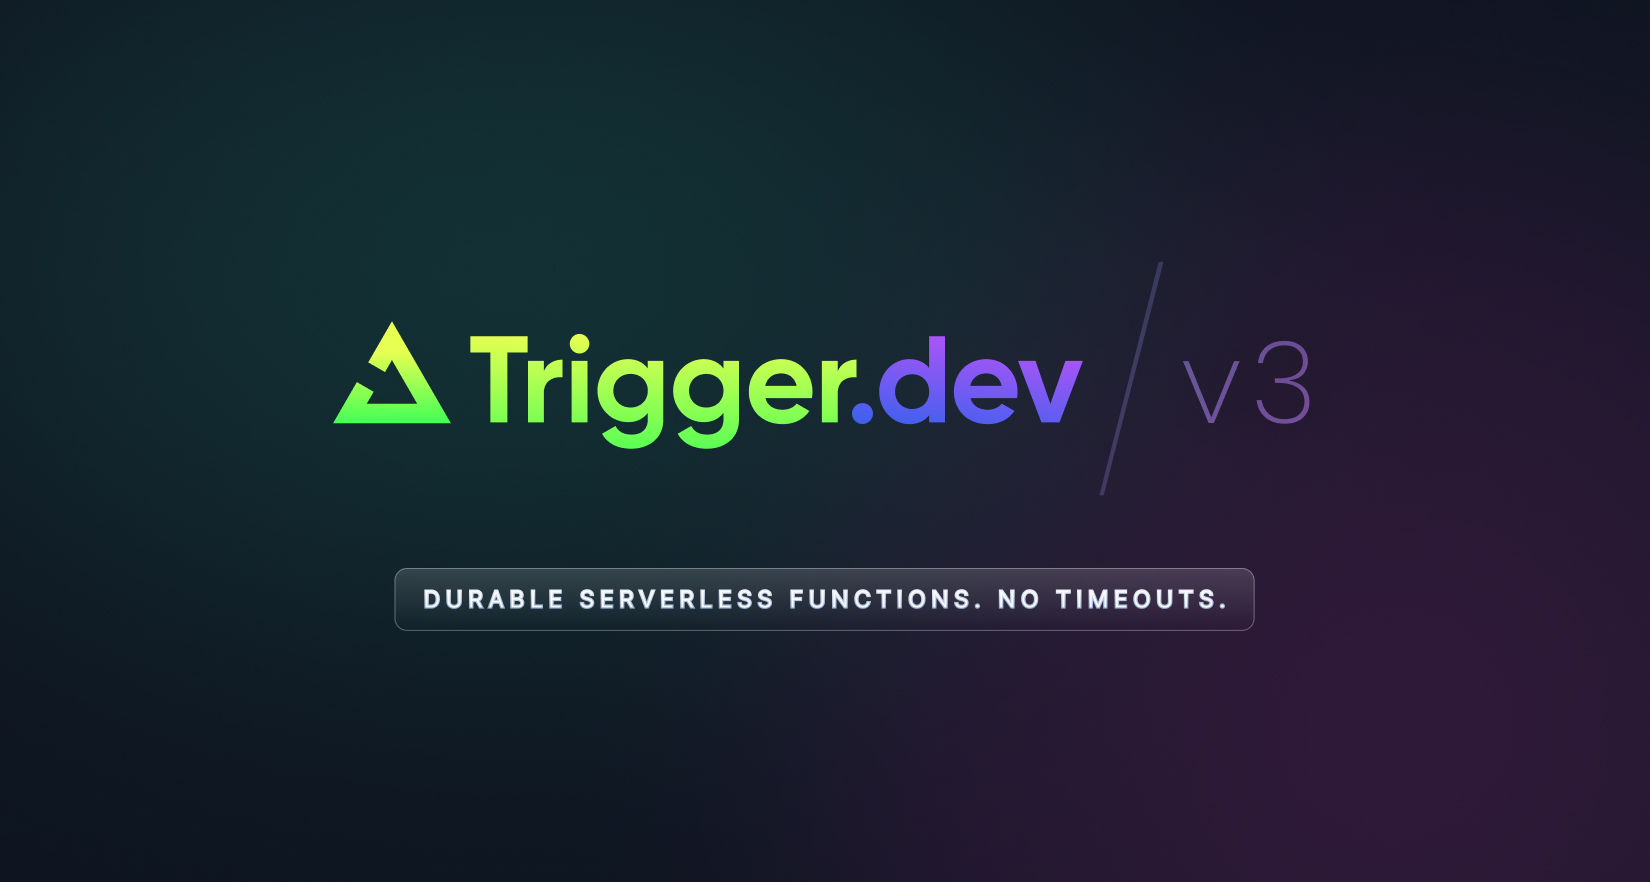 Trigger.dev v3: Durable Serverless functions. No timeouts.